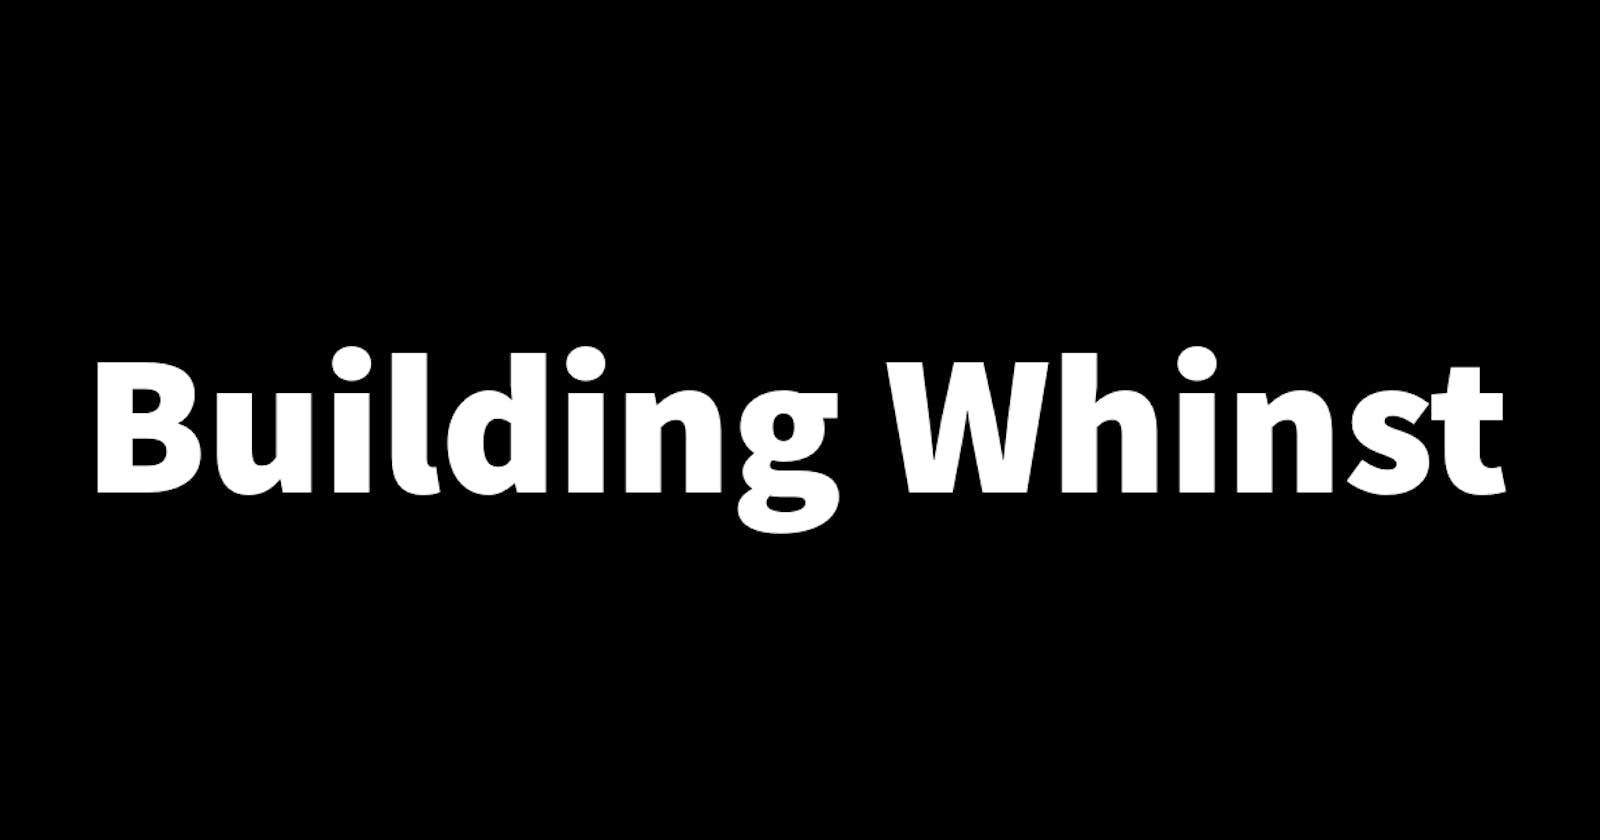 Building Whinst: Prologue